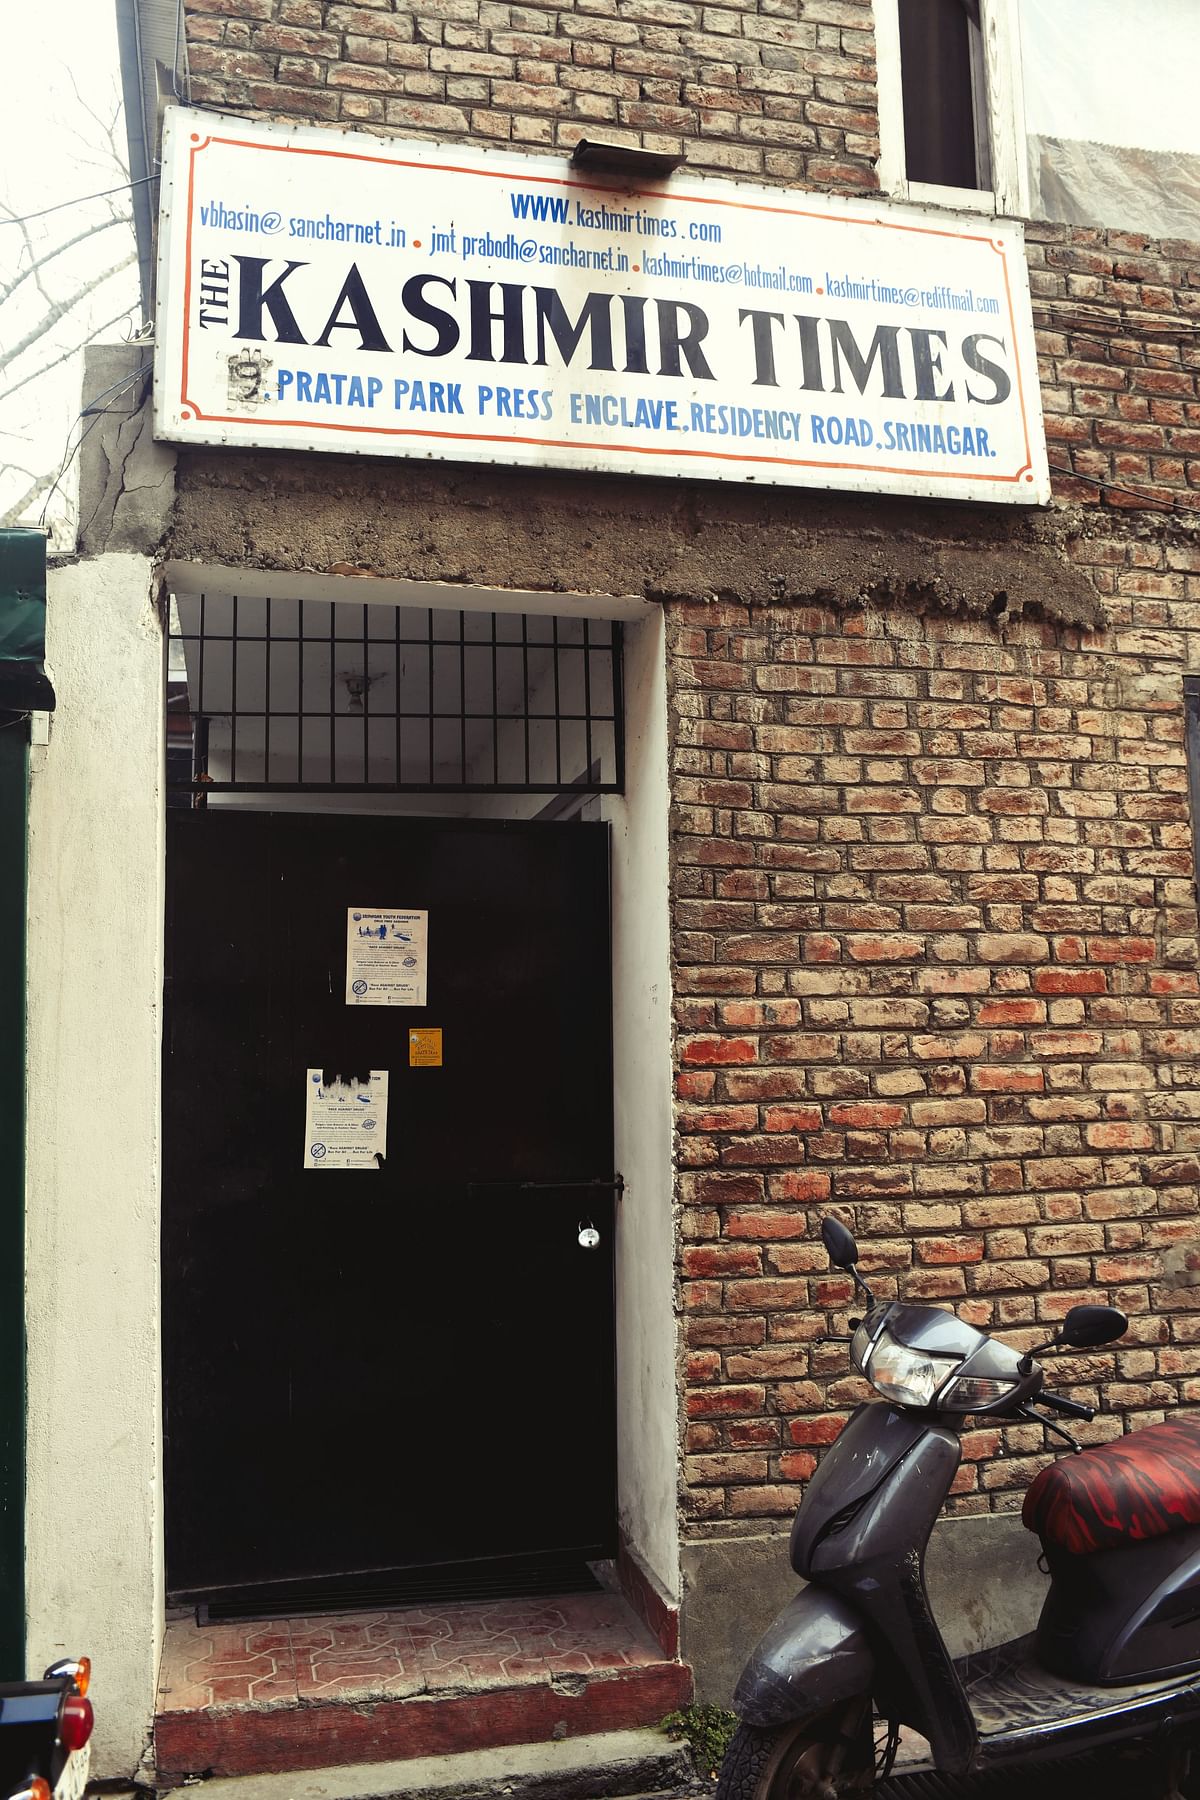 In just 13 months, the J&K administration has shut down the offices of two dailies at Kashmir’s Press Colony.